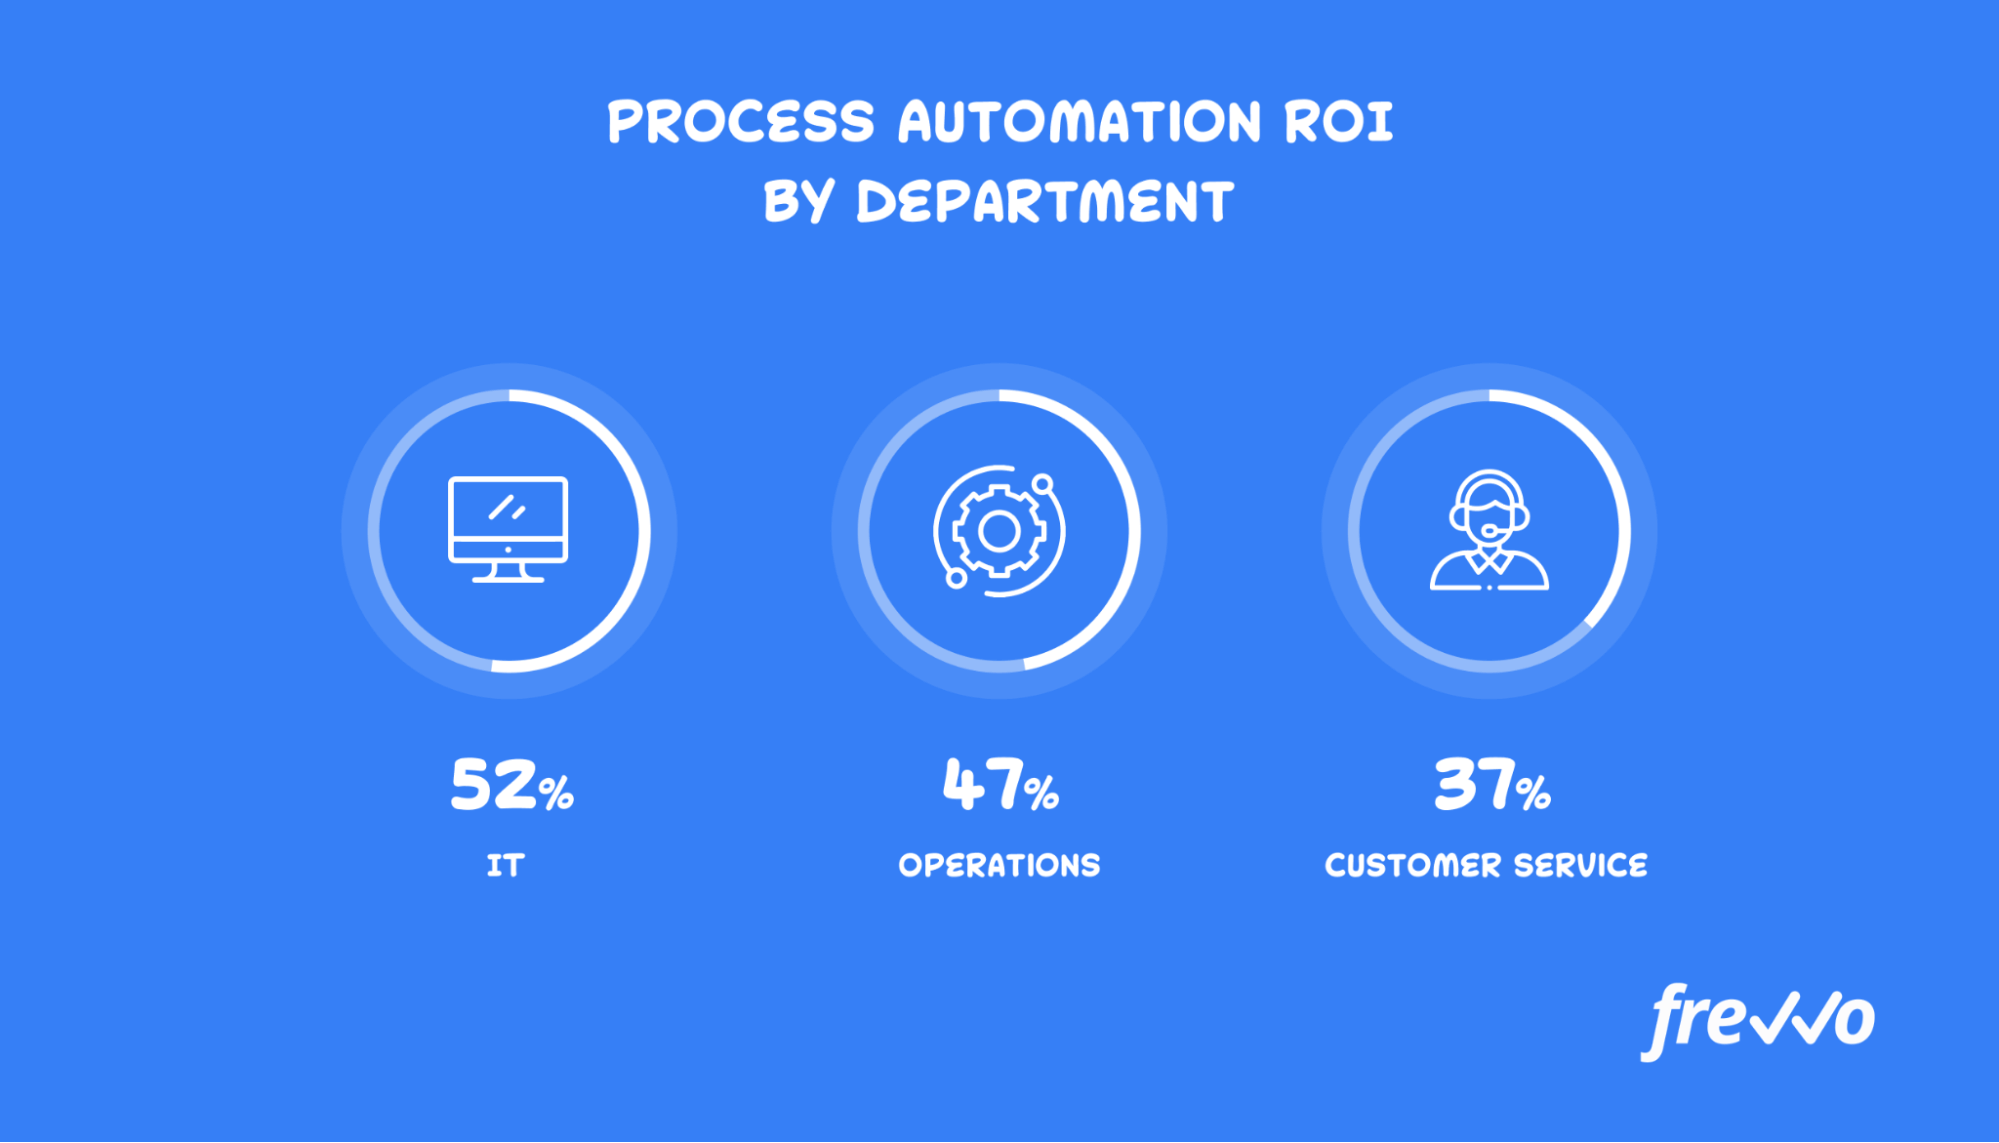 Process Automation ROI by Department